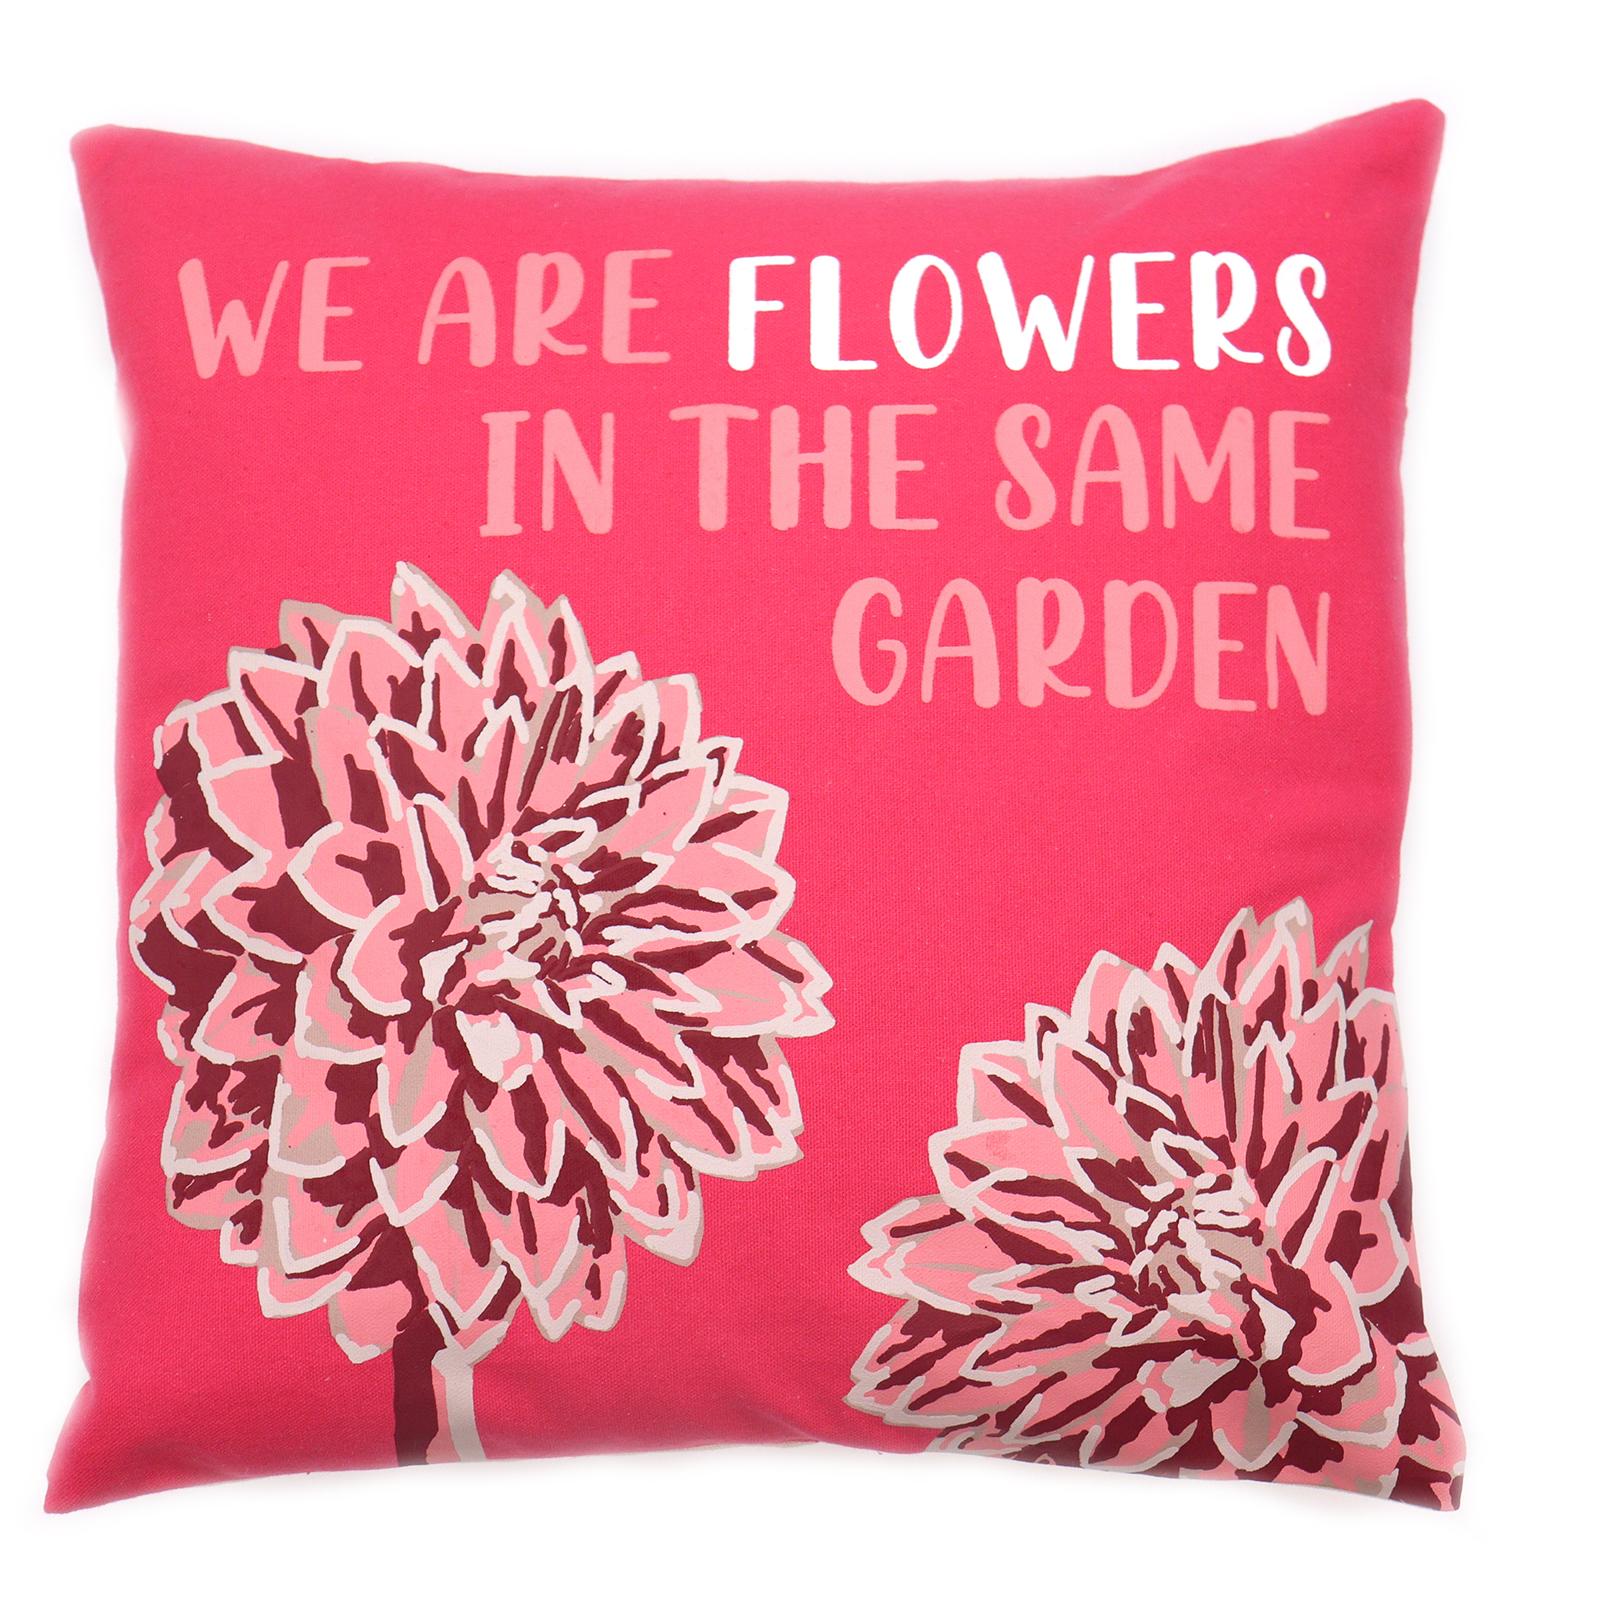 3x Printed Cotton Cushion Cover ("We are Flowers in the same Garden")